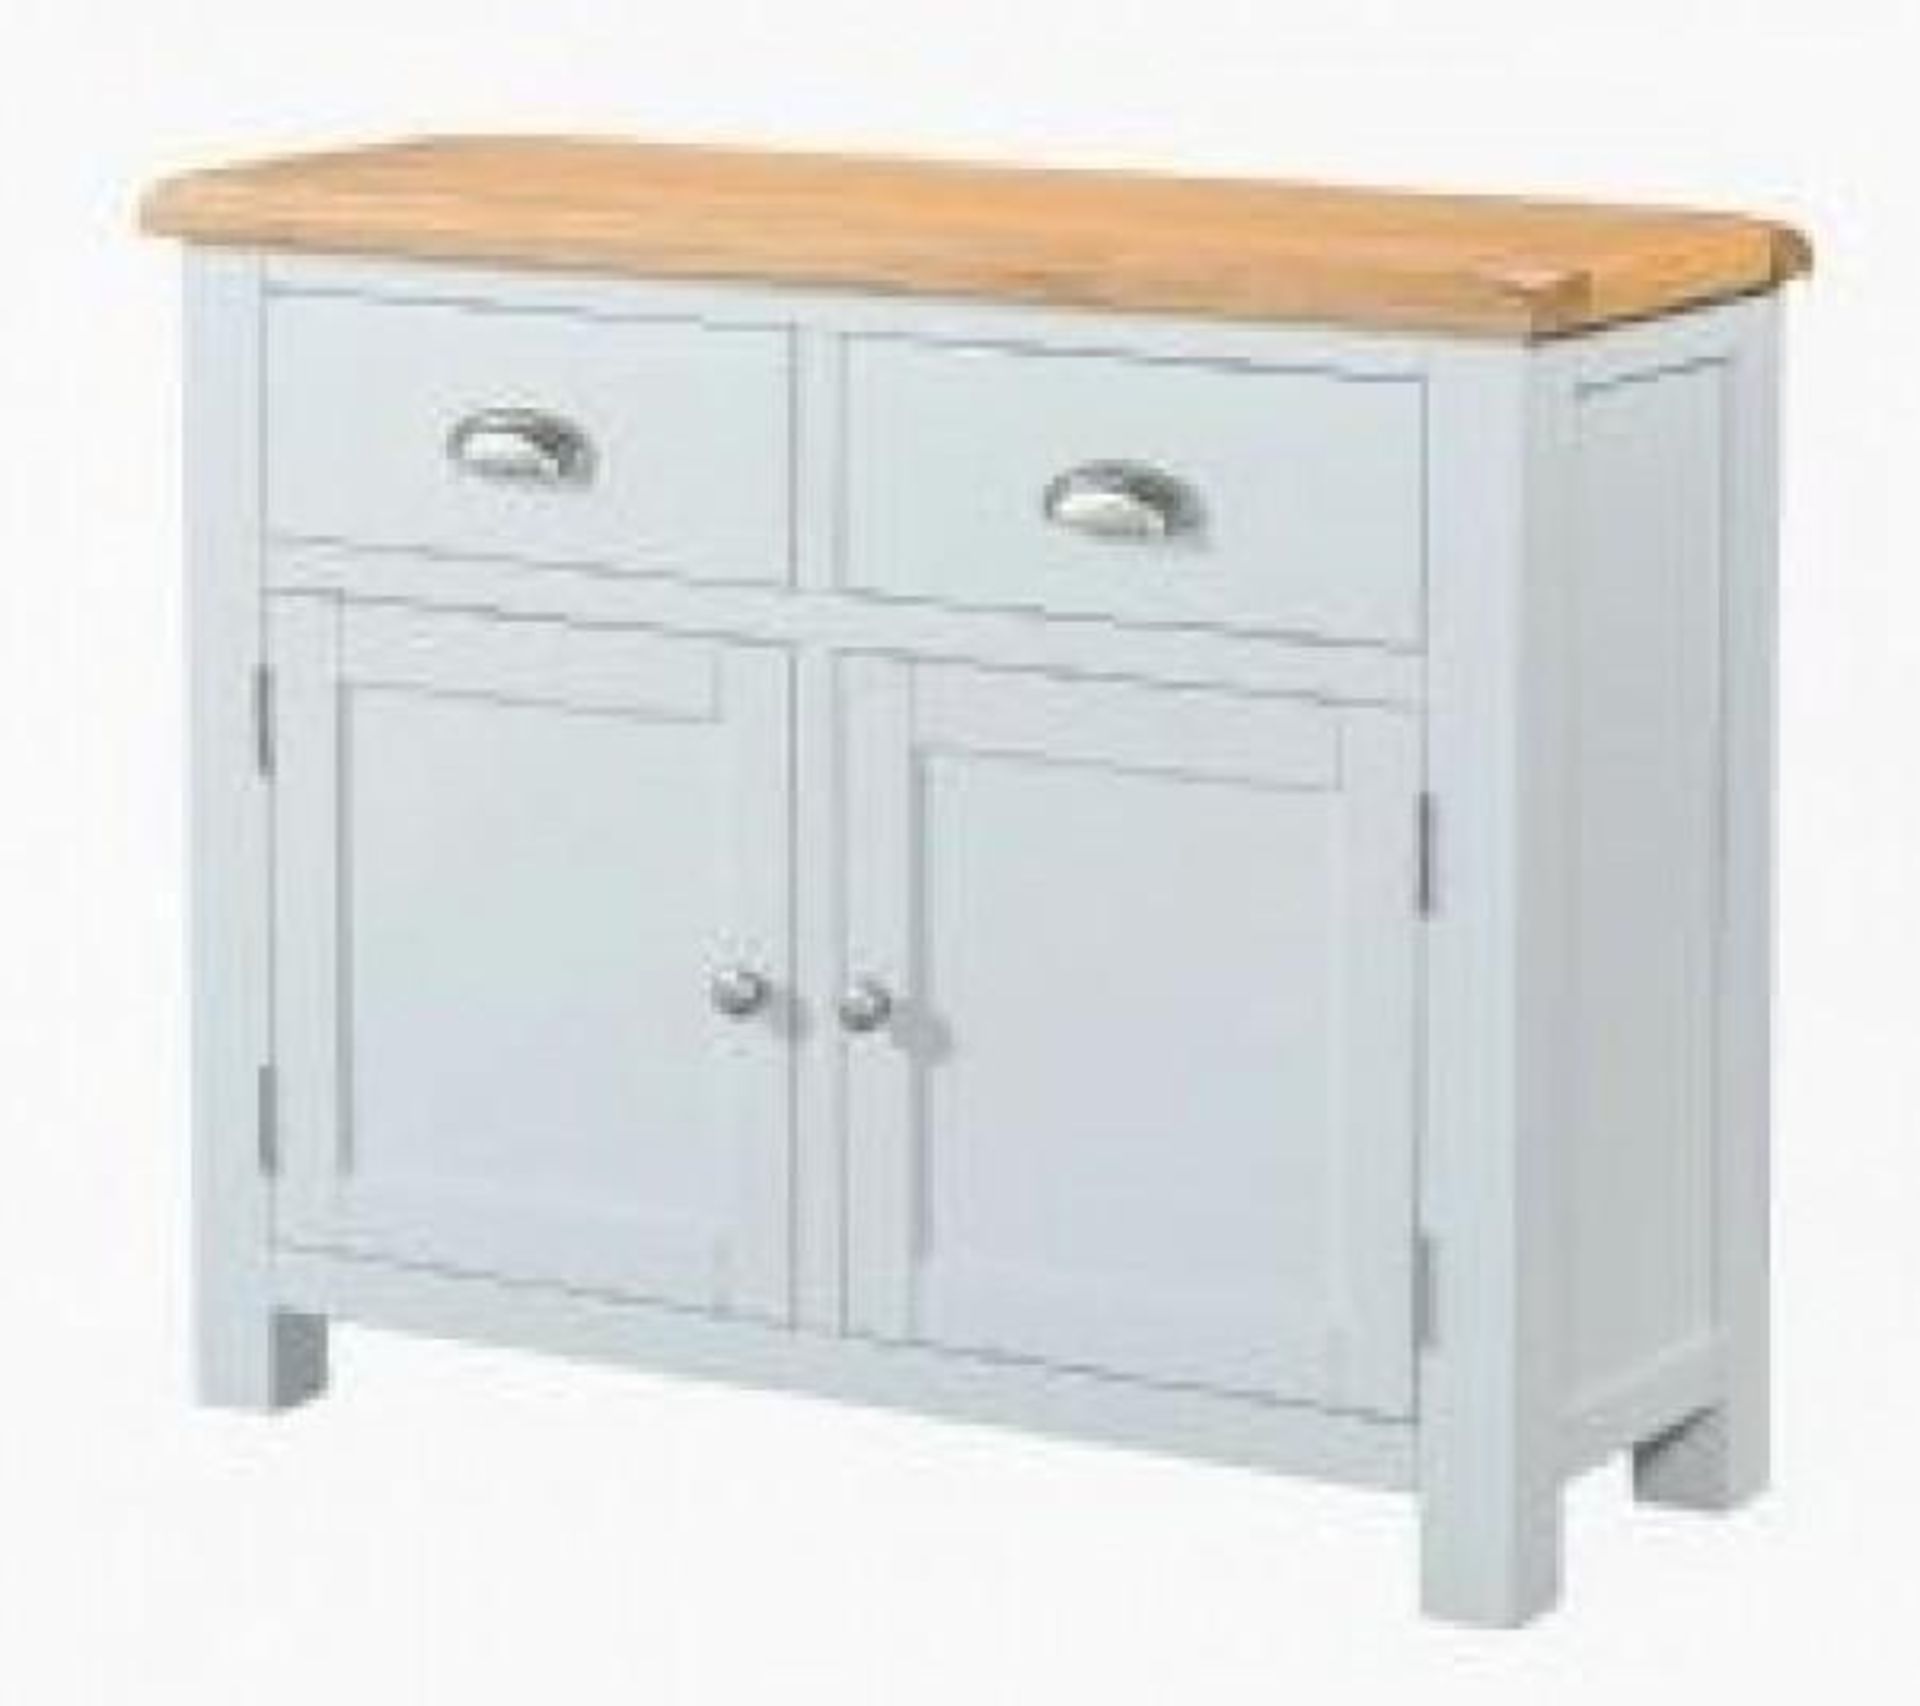 BRAND NEW & BOXED clevedon small sideboard